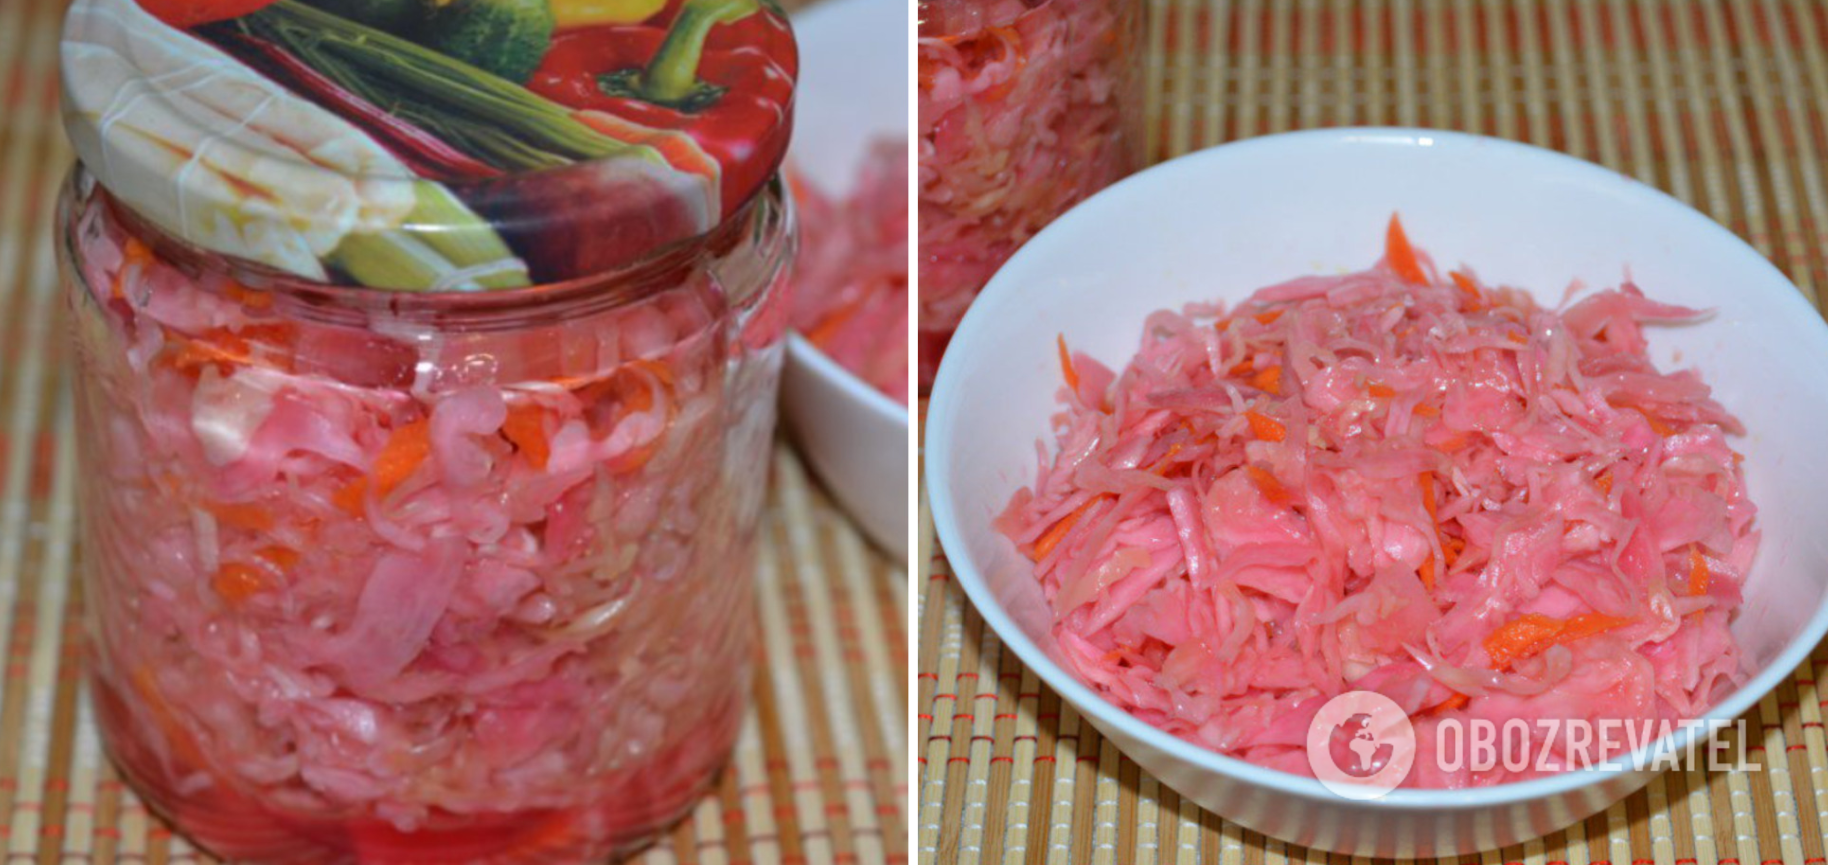 A salad of cabbage, beetroot and carrots that can be stored in jars